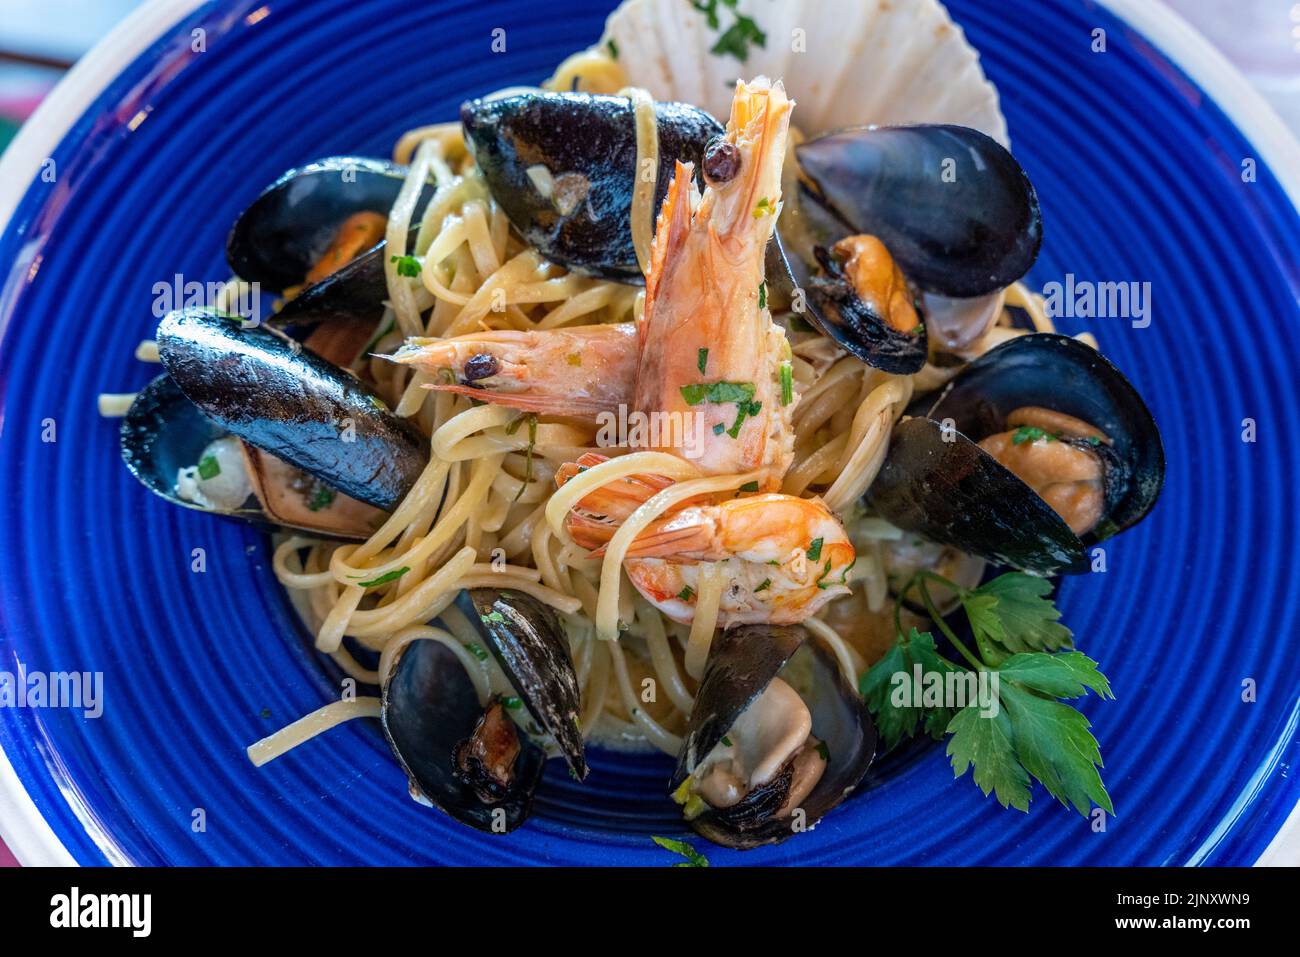 A Typical Seafood Dish Served At Restaurant In Ammoudi Bay, Oia, Santorini, Greek Islands, Greece. Stock Photo